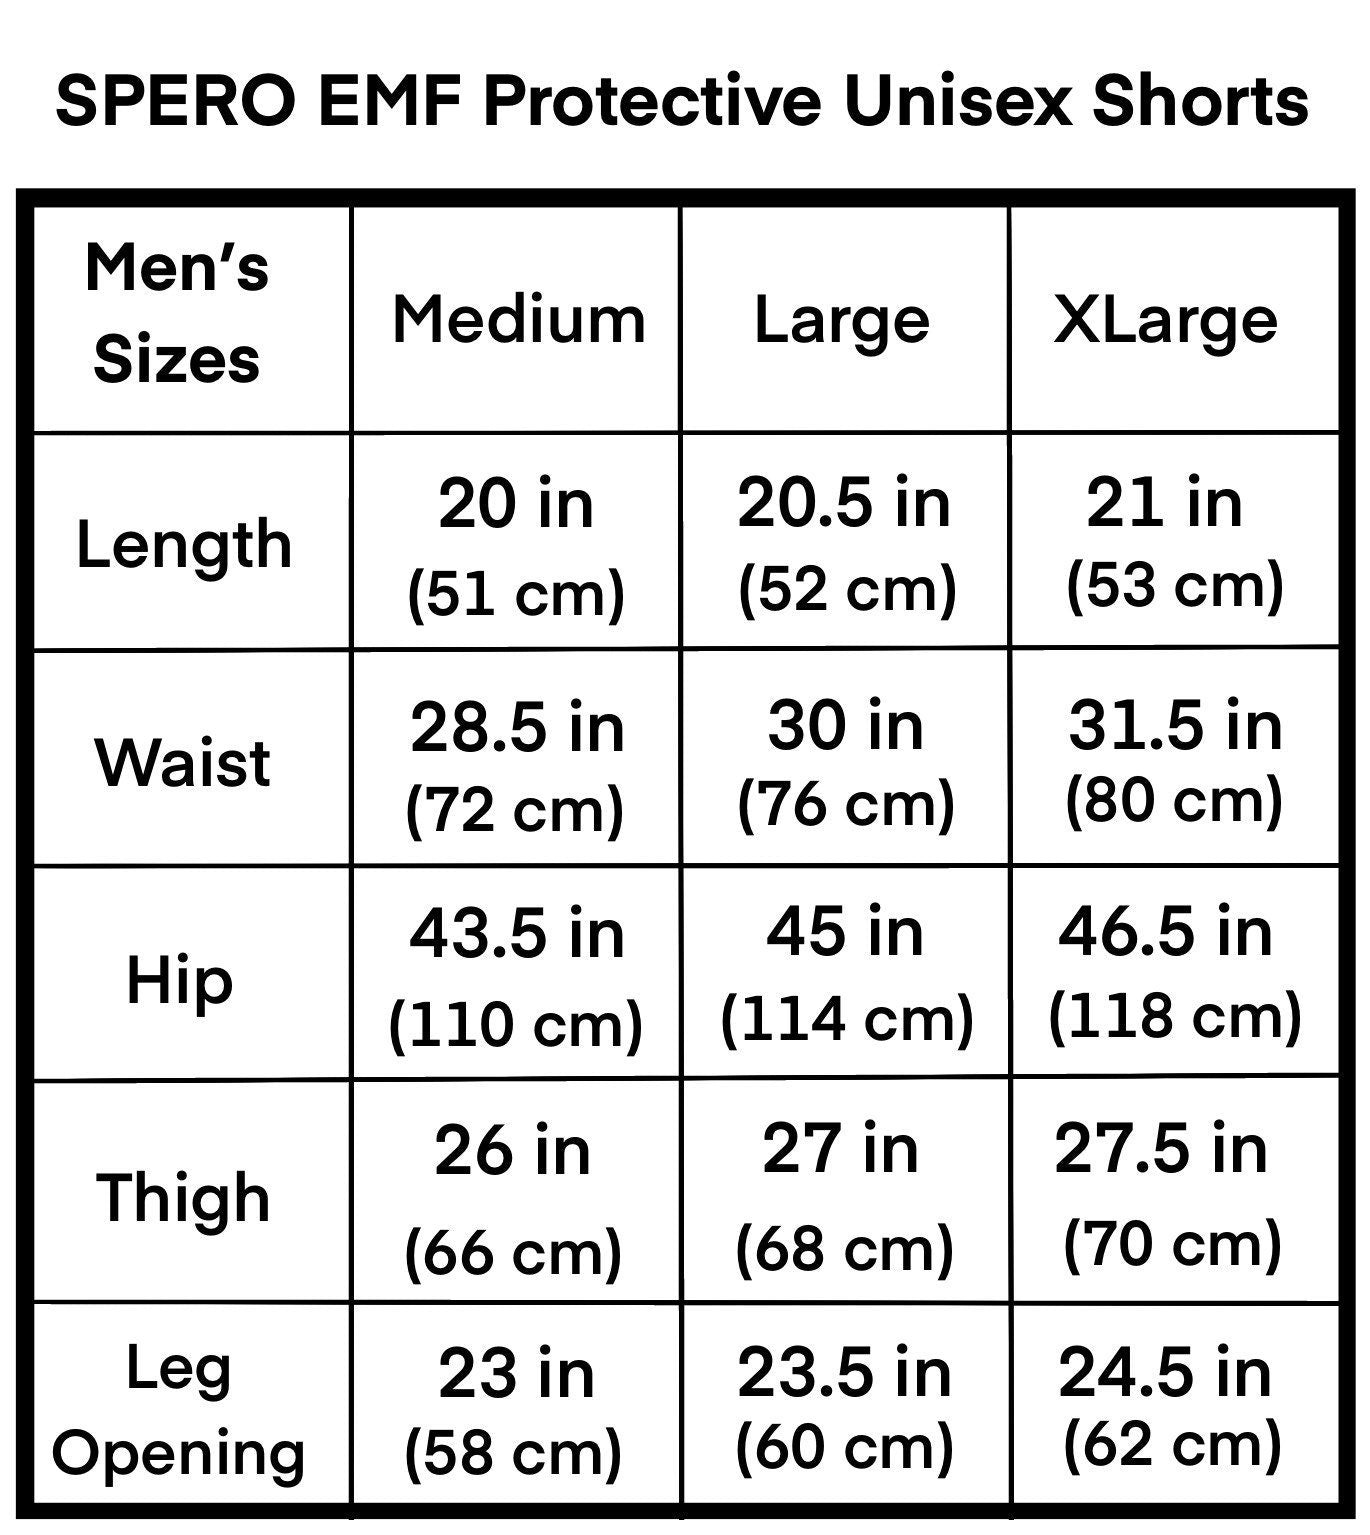 SPERO EMF Silver Lined Shorts